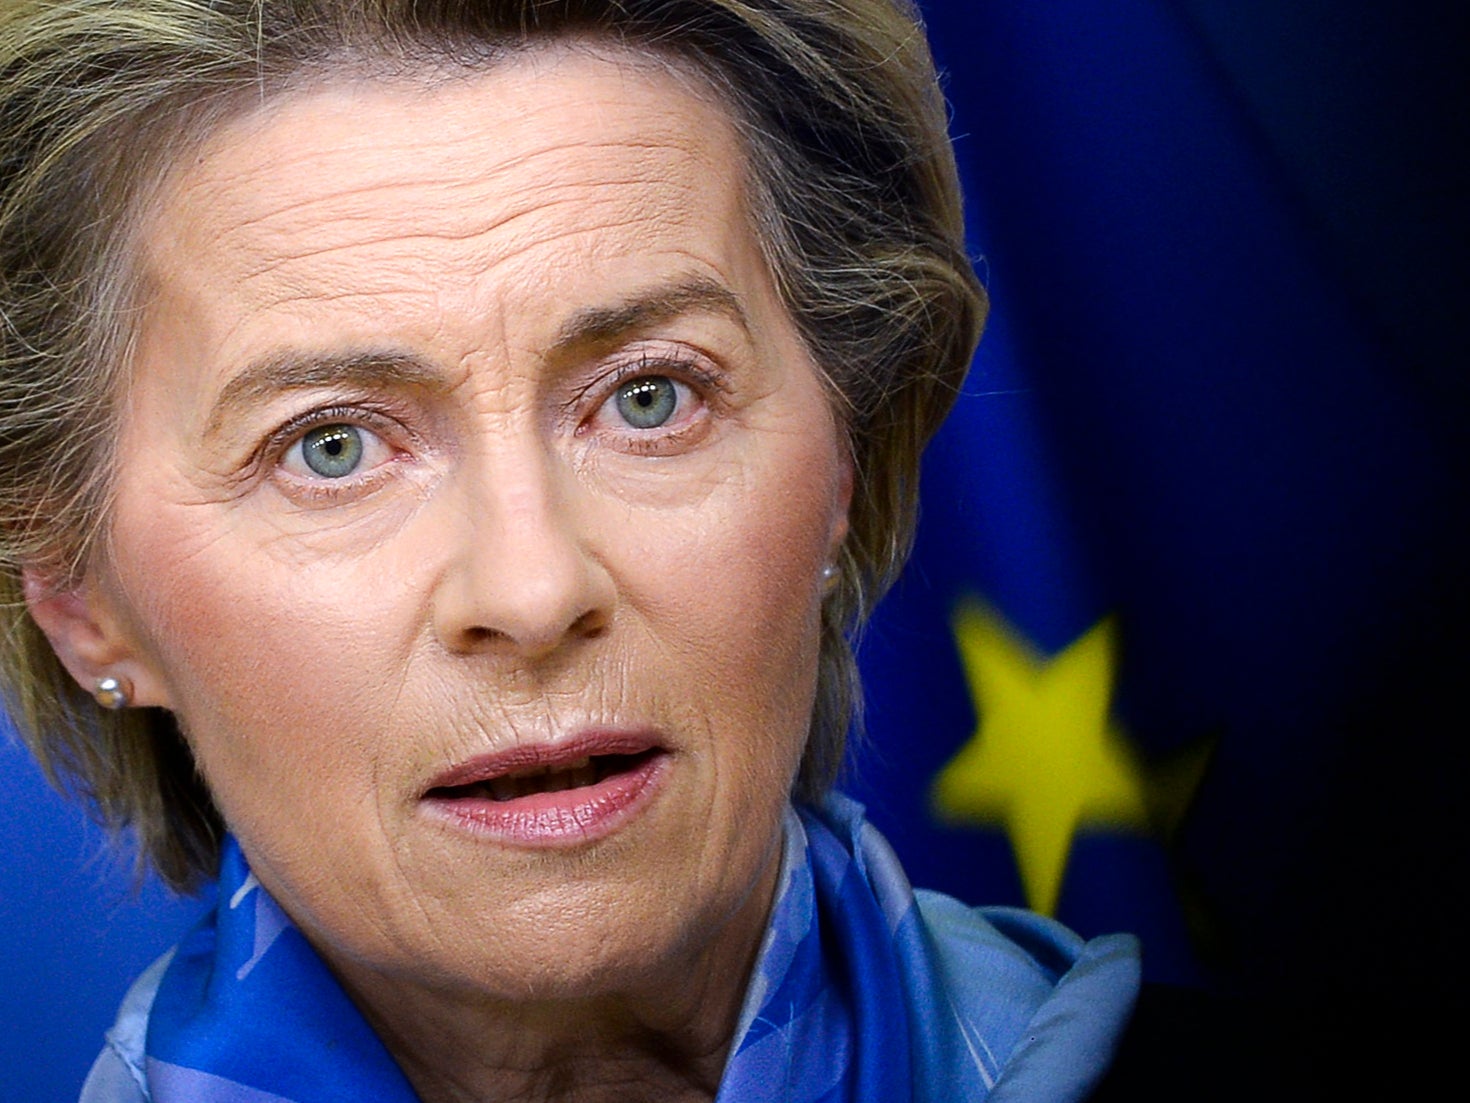 European Commission President Ursula von der Leyen said she is alarmed by tech companies’ role in Capitol violence&nbsp;